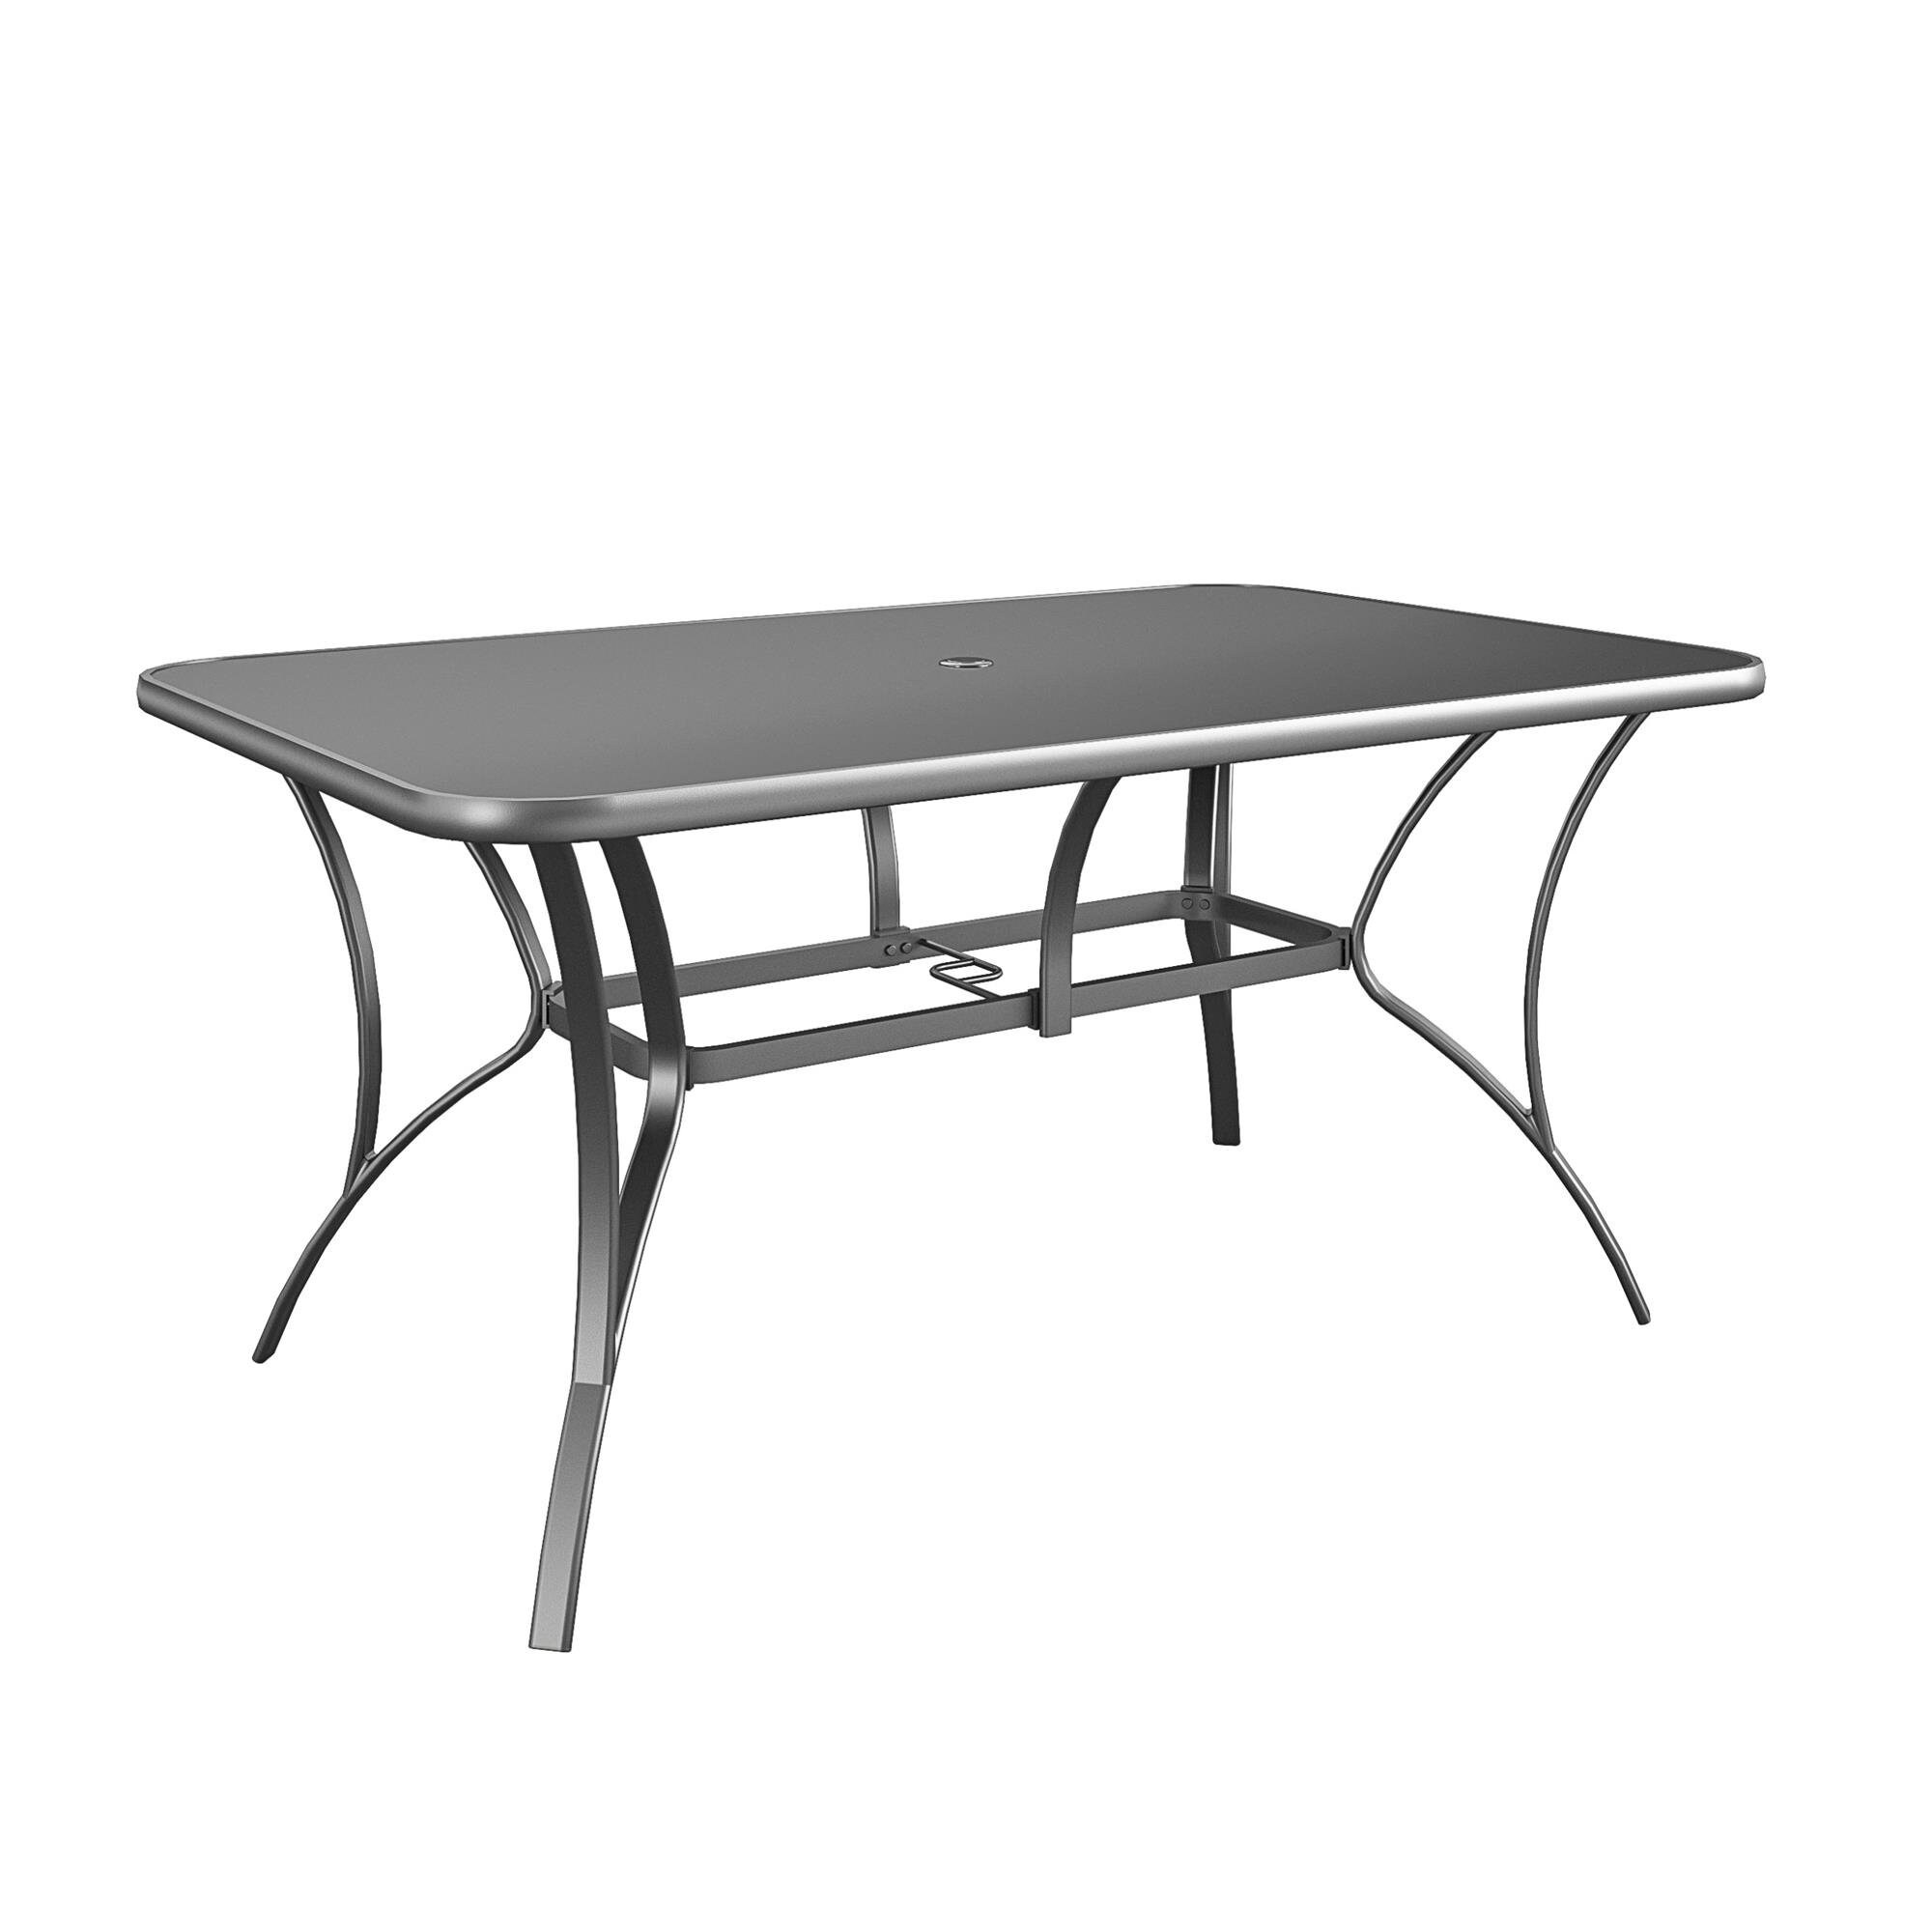 Outdoor living steel rectangular terrace dining table, charcoal